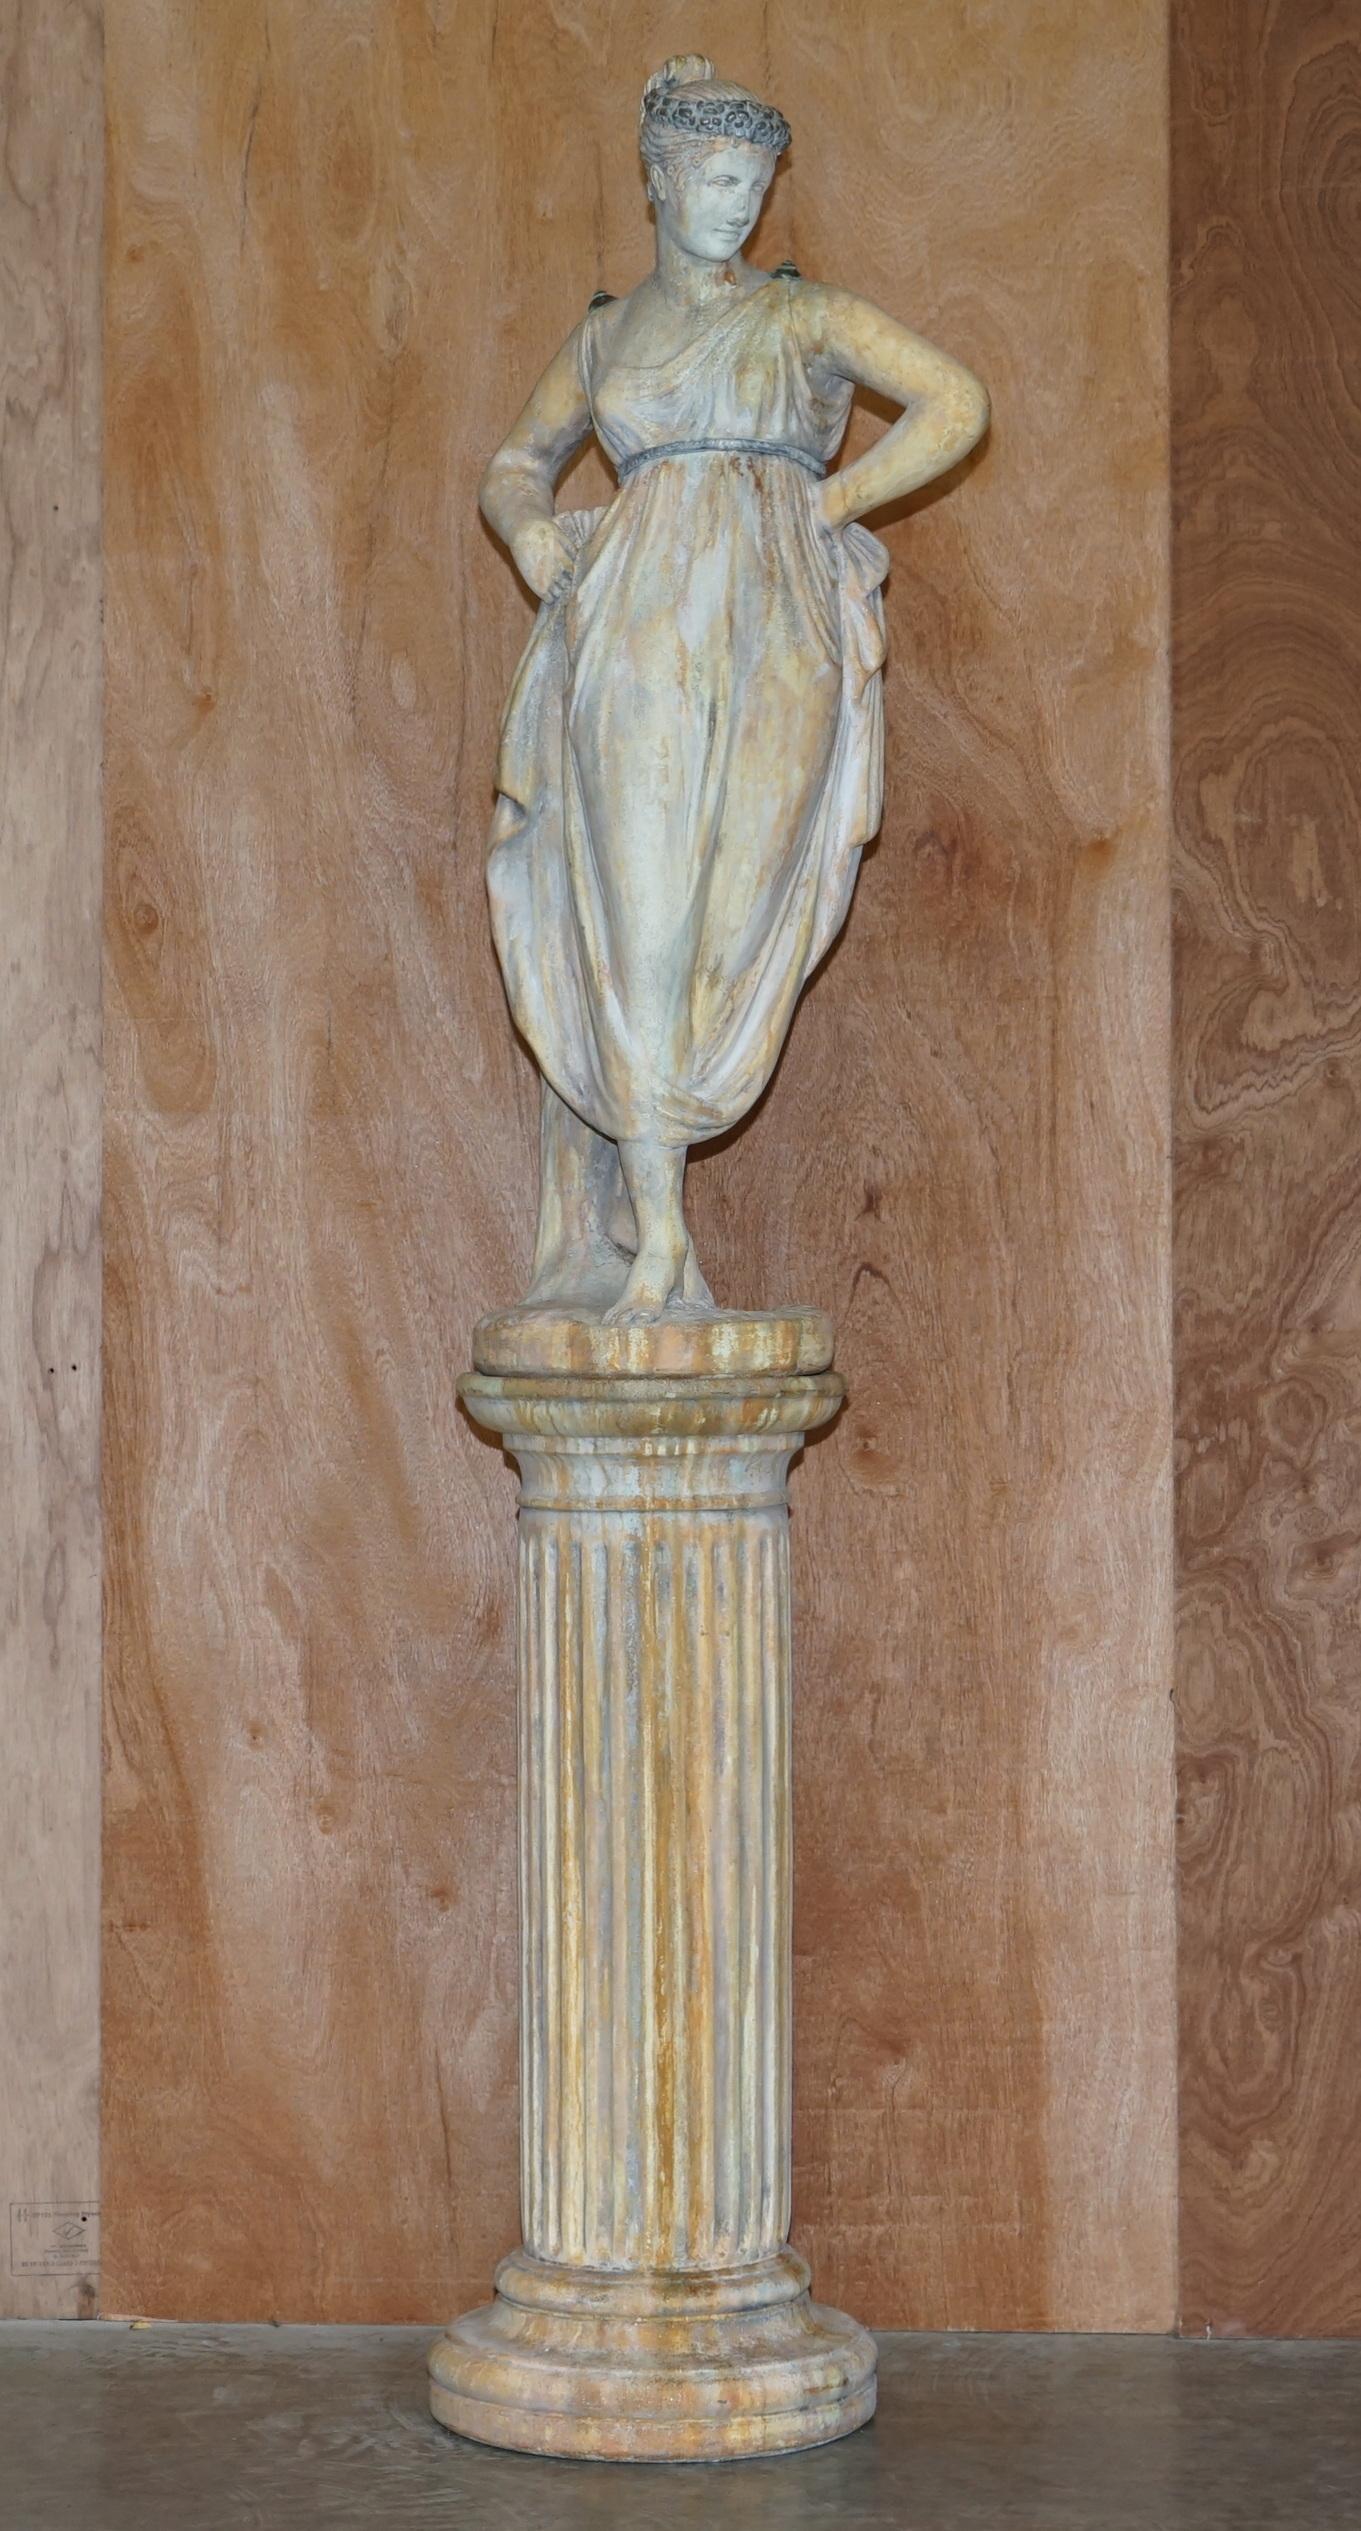 We are delighted to offer this exquisite signed TG stone neoclassical figure with bronze and pewter mounts standing on a pedestal base 

A beautifully weathered piece, the form and expression of the maiden is pure neoclassical elegance. The good